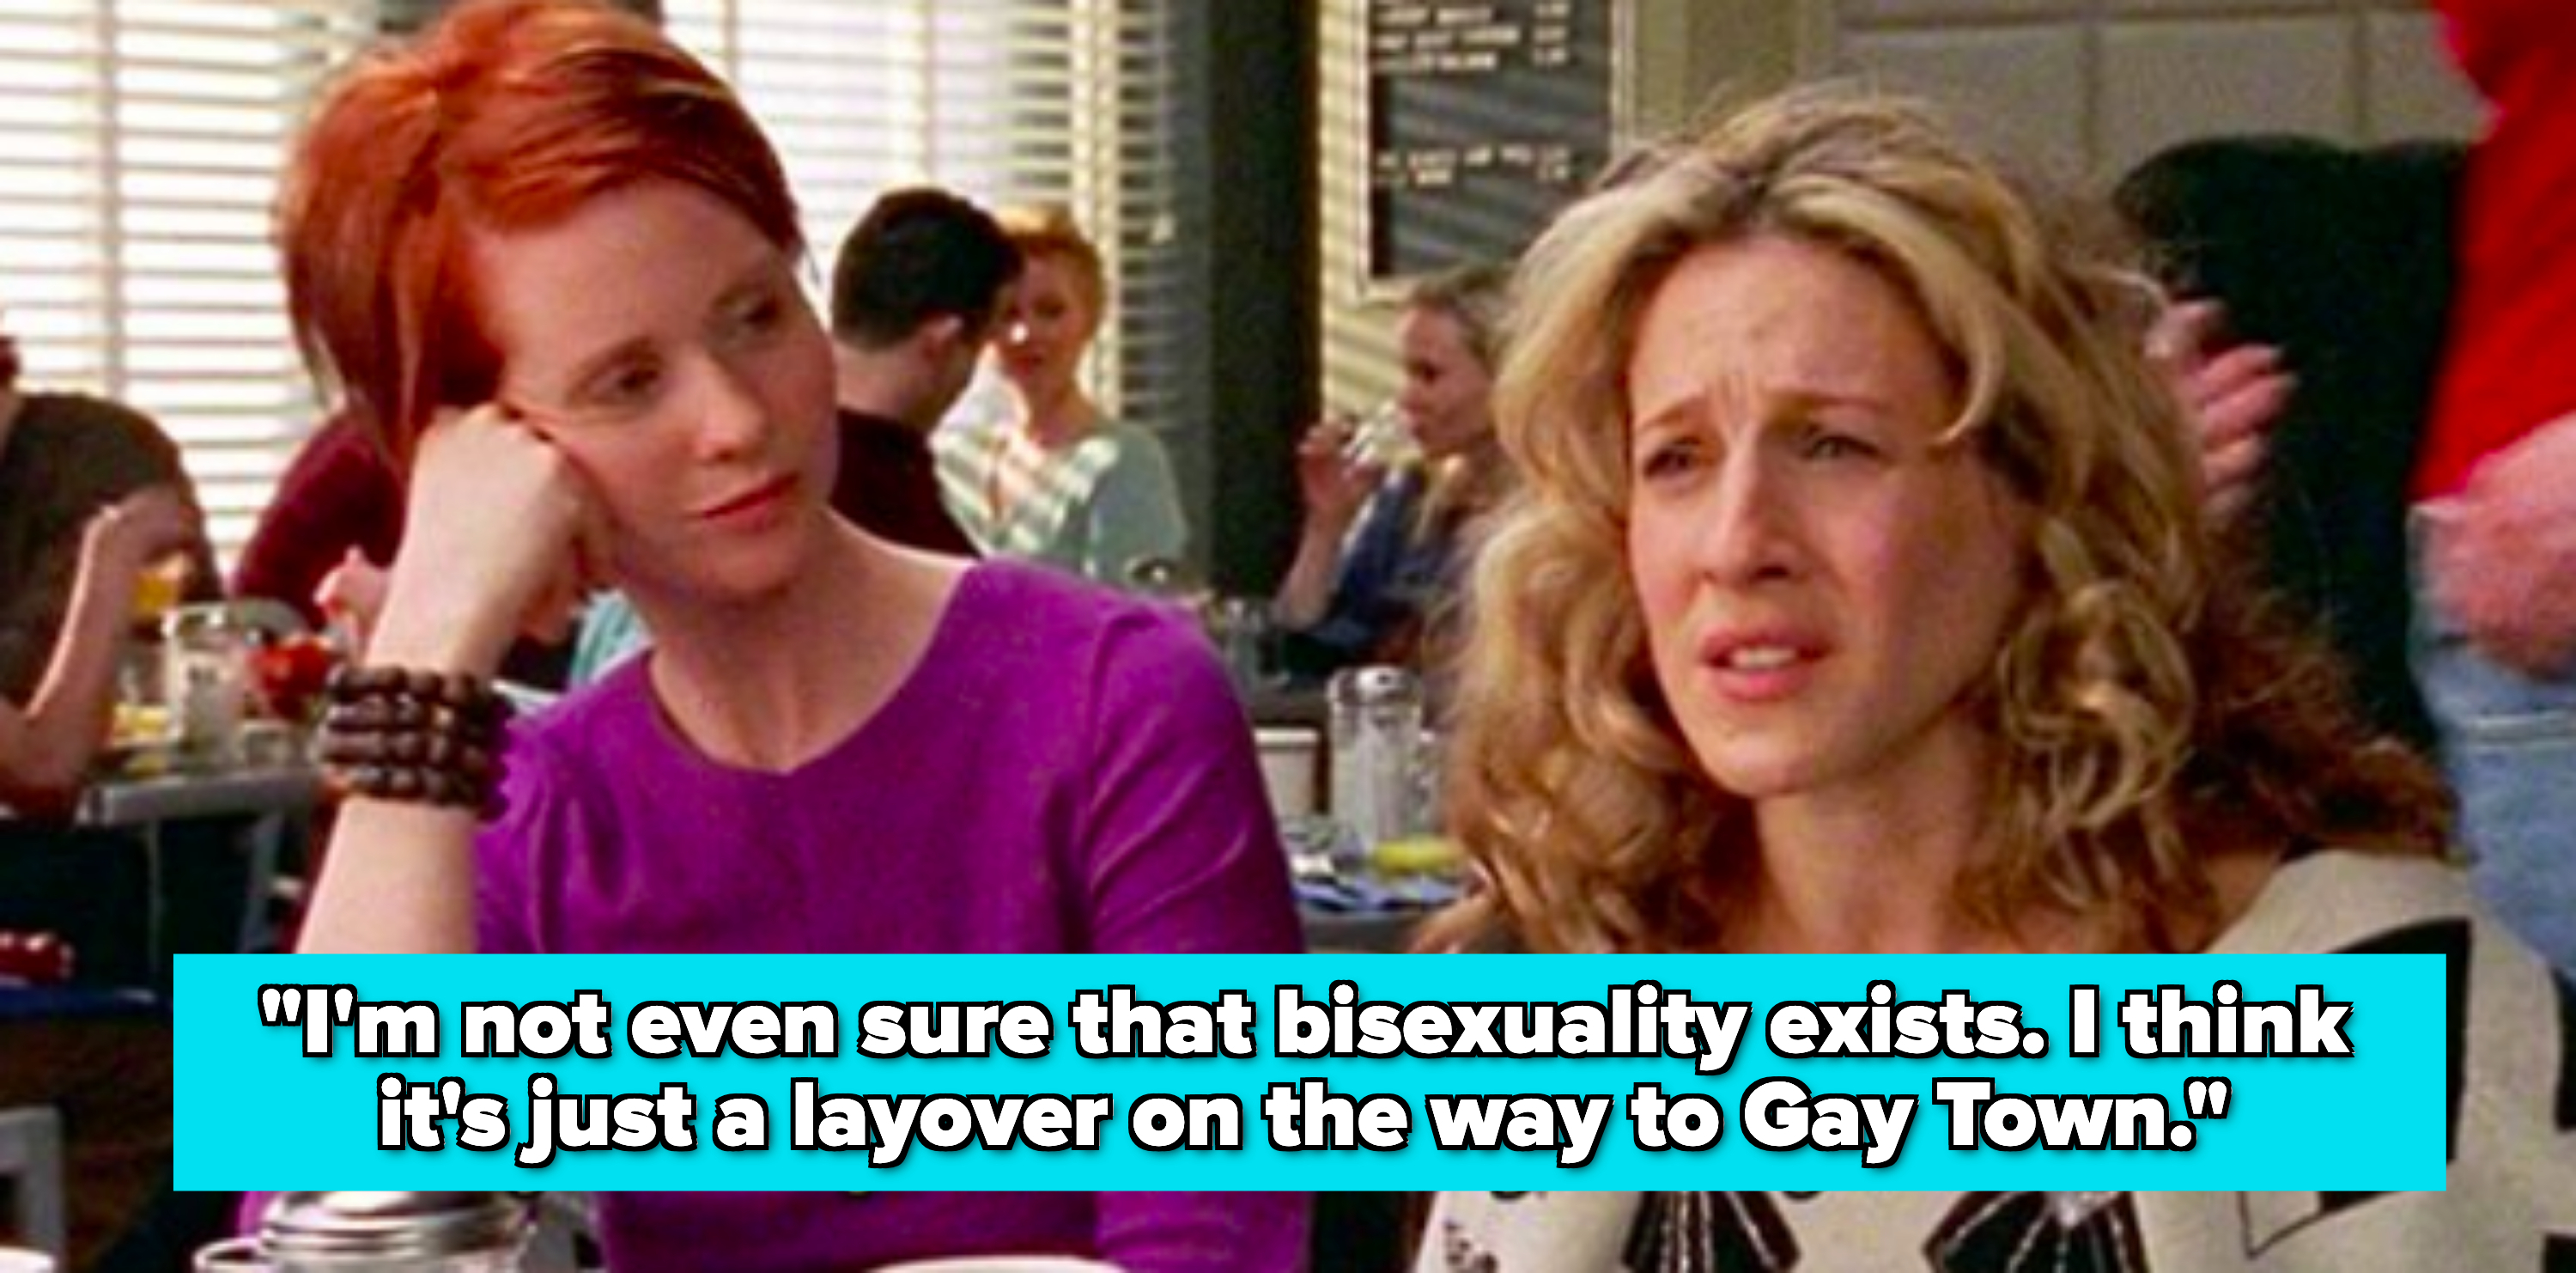 Carrie to Miranda: &quot;I&#x27;m not even sure bisexuality exists. I think it&#x27;s just a layover on the way to Gay Town&quot;